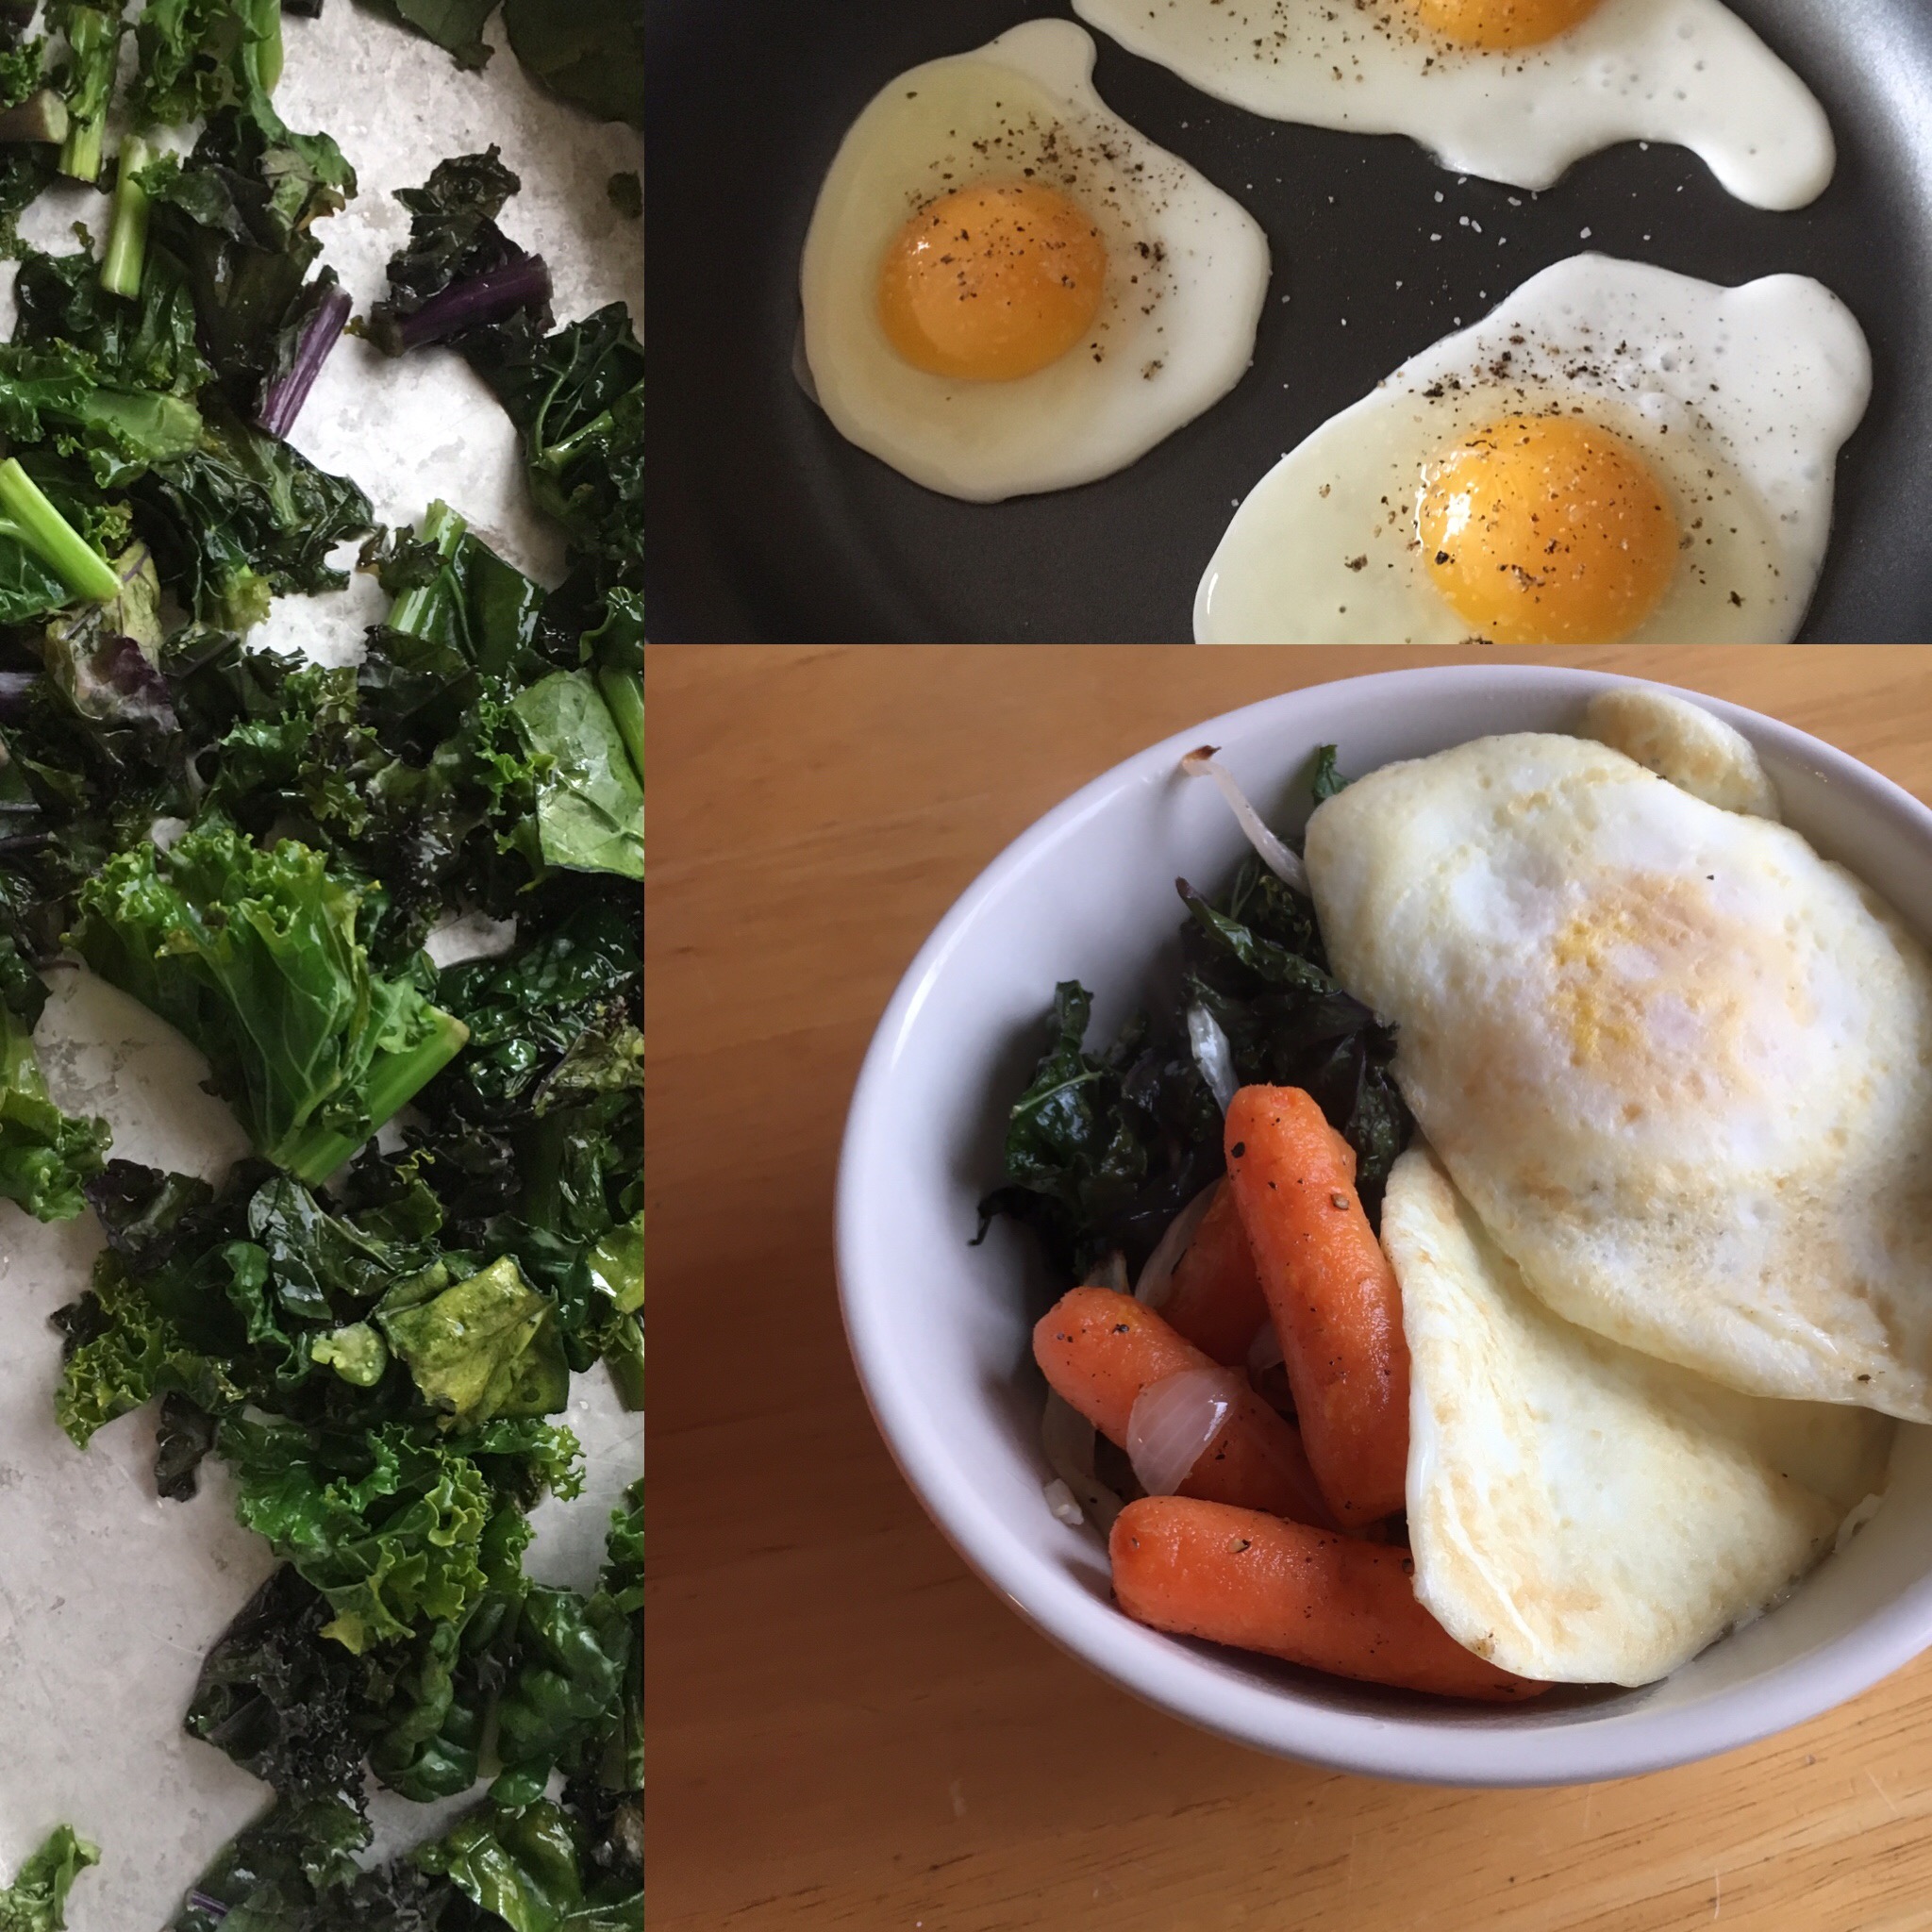 A variation on Brown Rice Bowls with Roasted Broccoli and Carrots to fuel a winter hike. Spoiler alert: you don't have to eat "breakfast food" for breakfast if you don't want to!